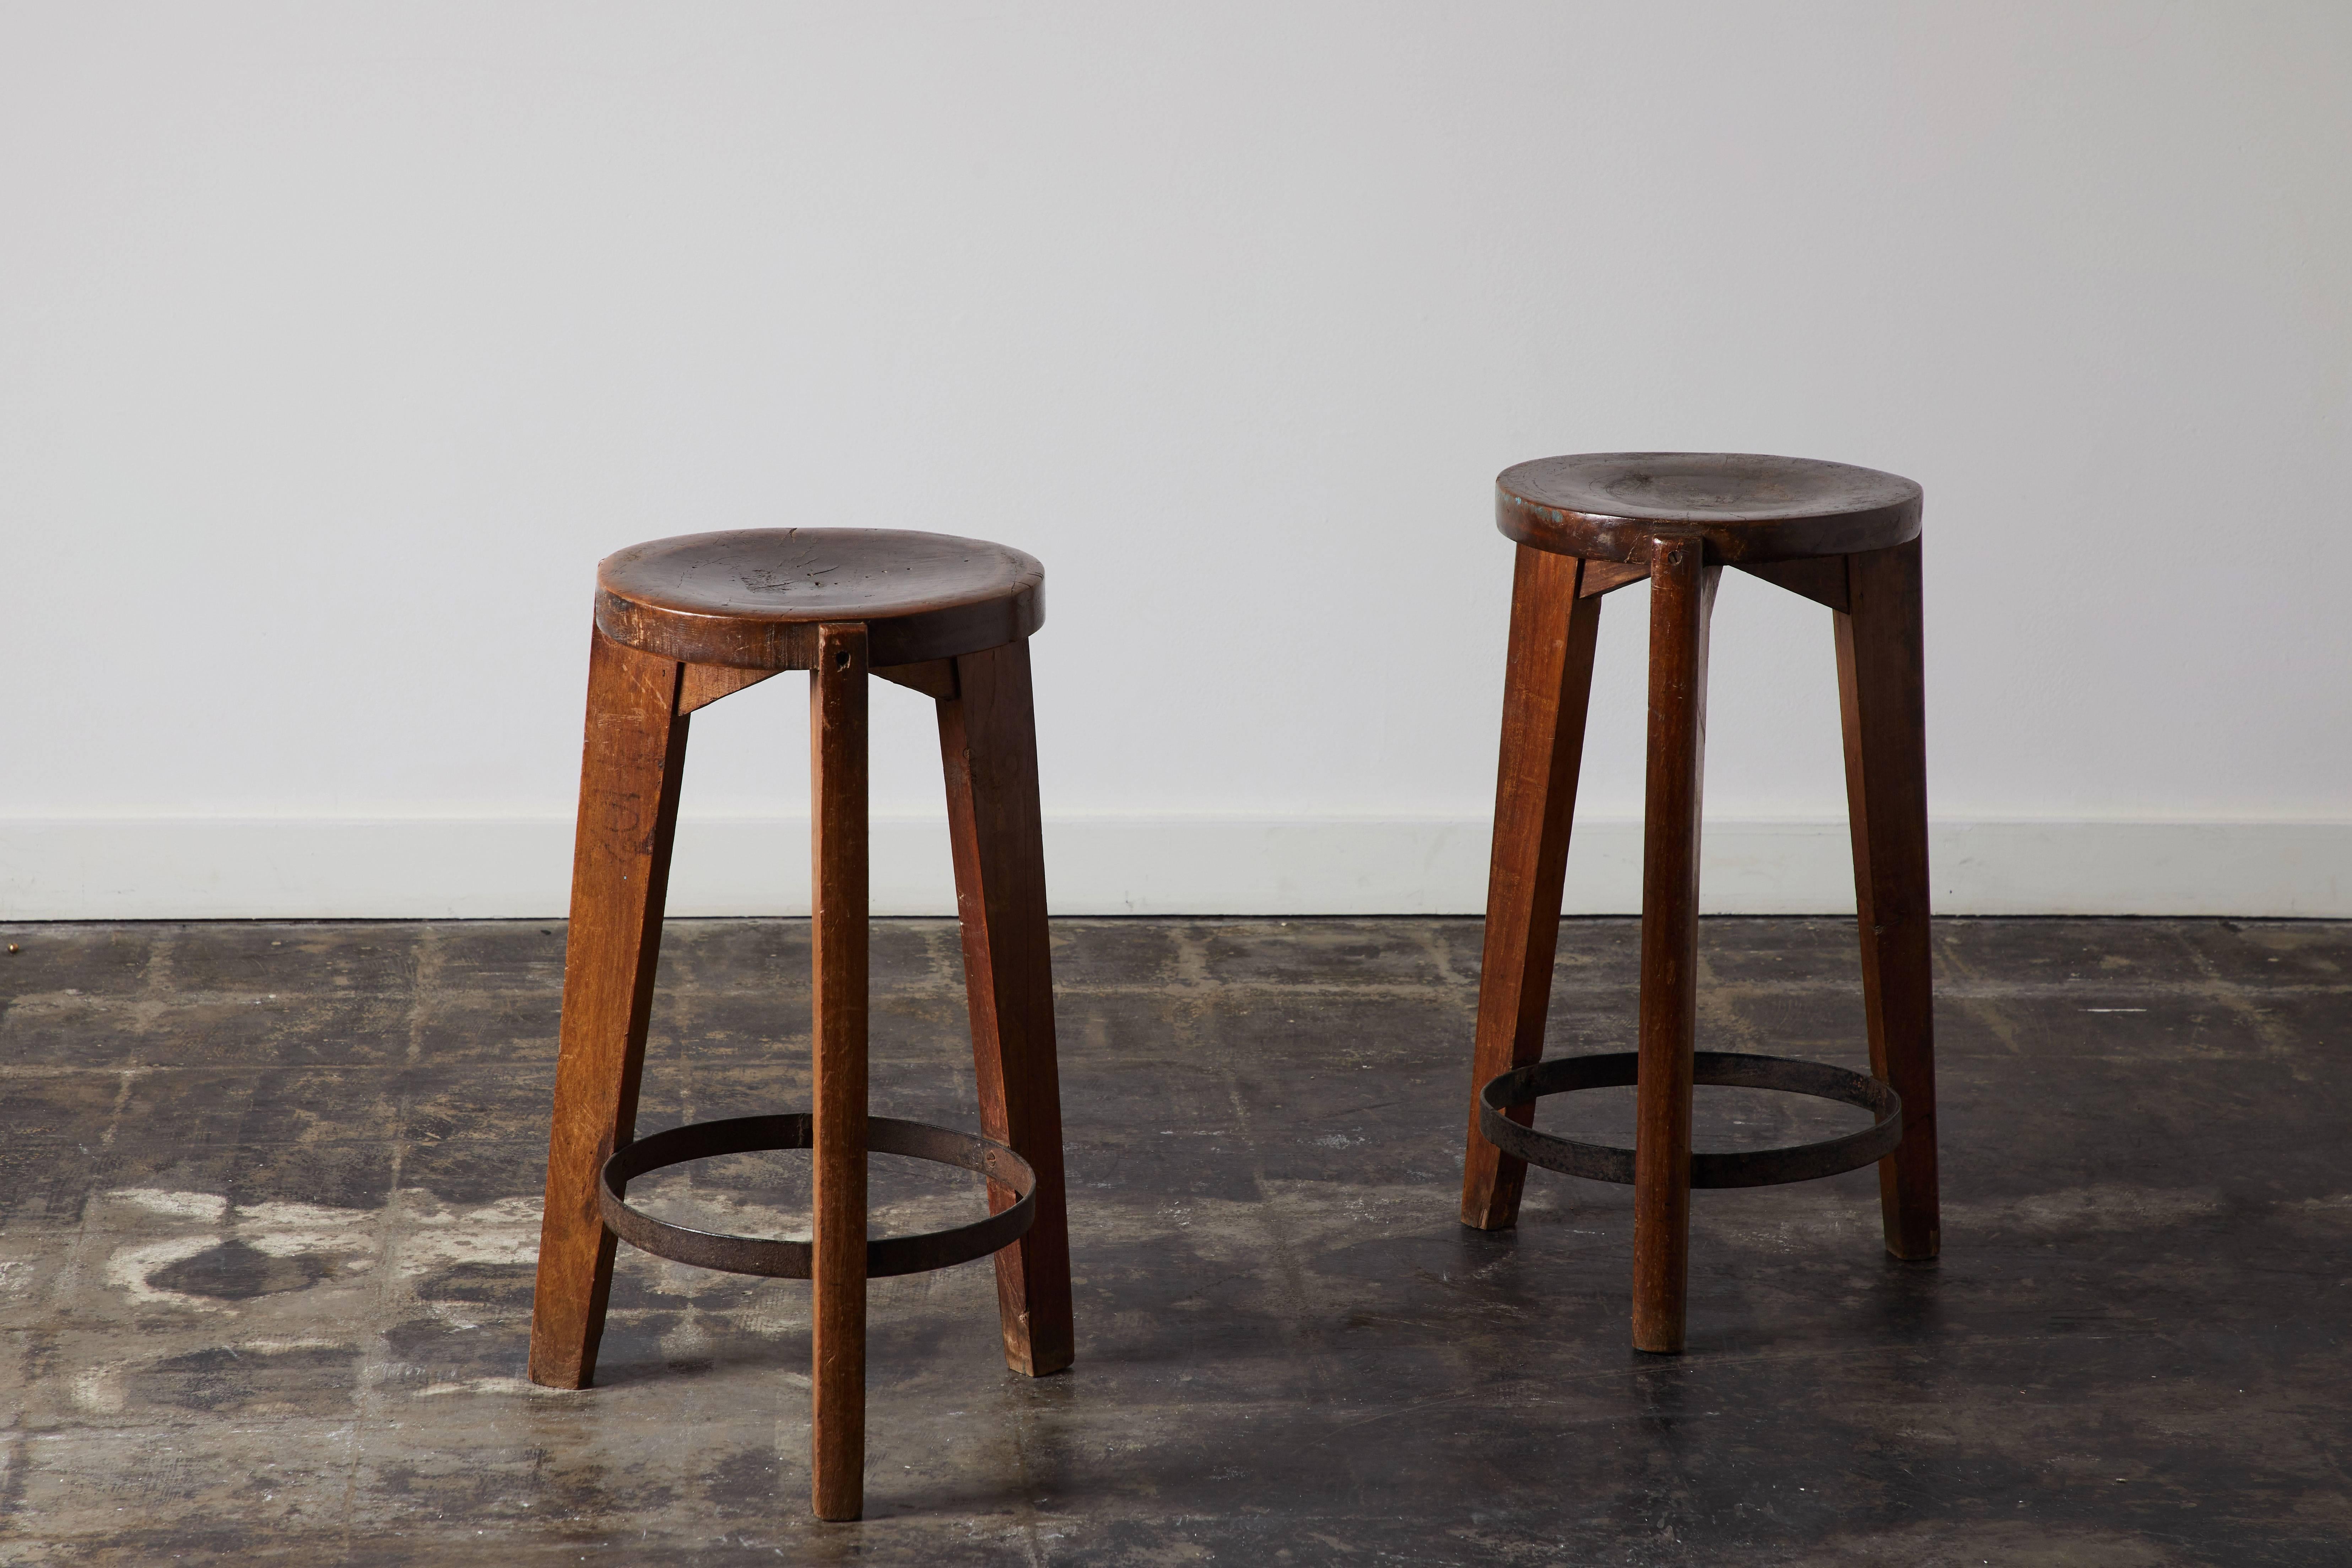 Steel Set of Four Stools by Pierre Jeanneret for Punjab University in Chandigarh